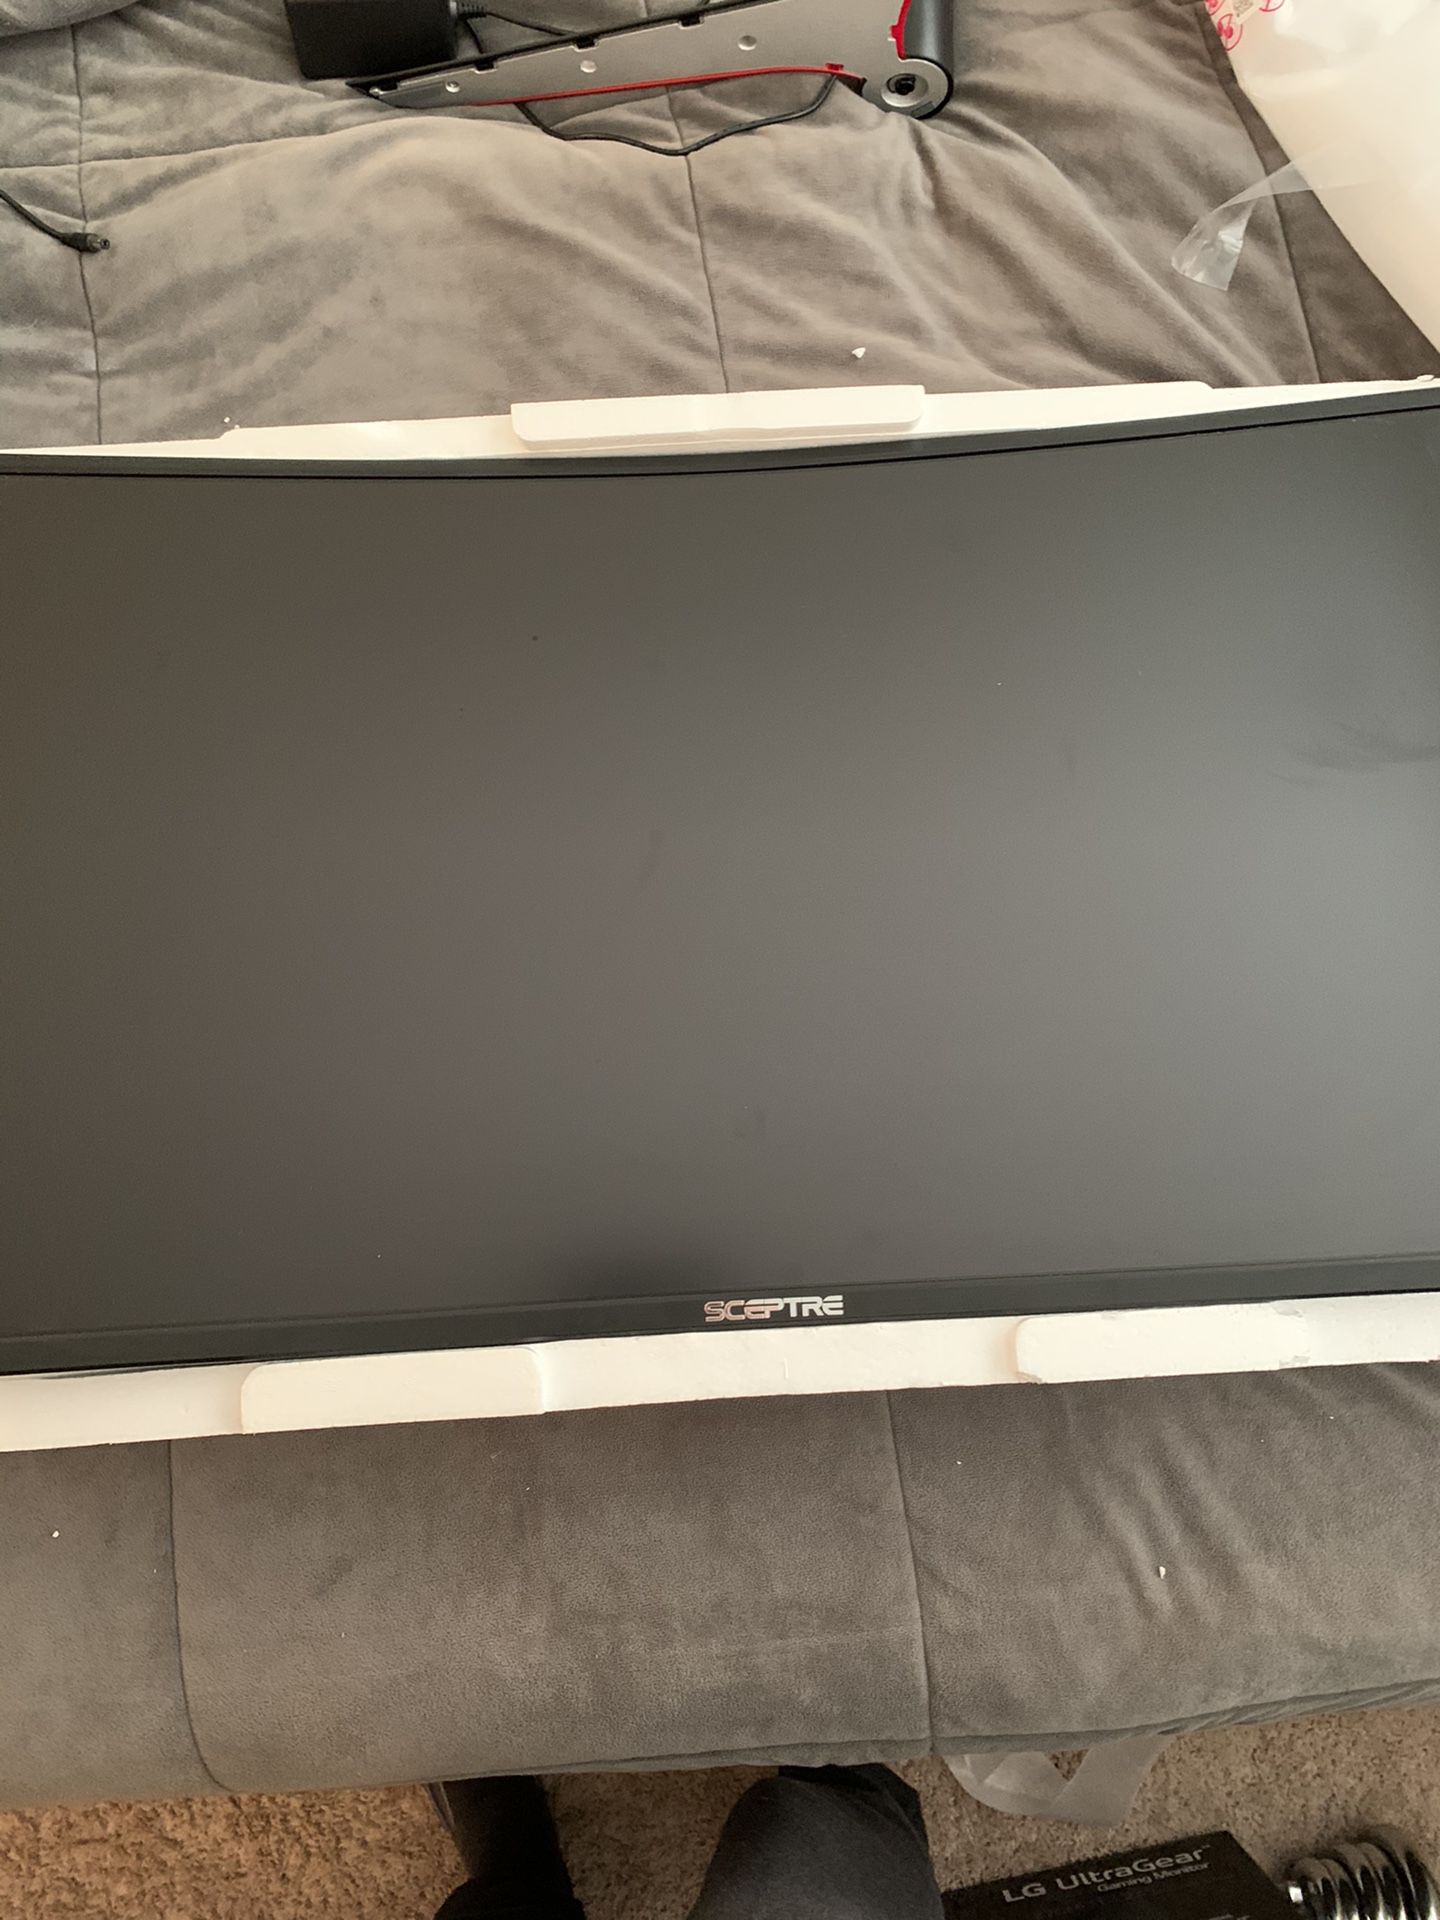 Scepter 32 inch curved 75Hr gaming monitor